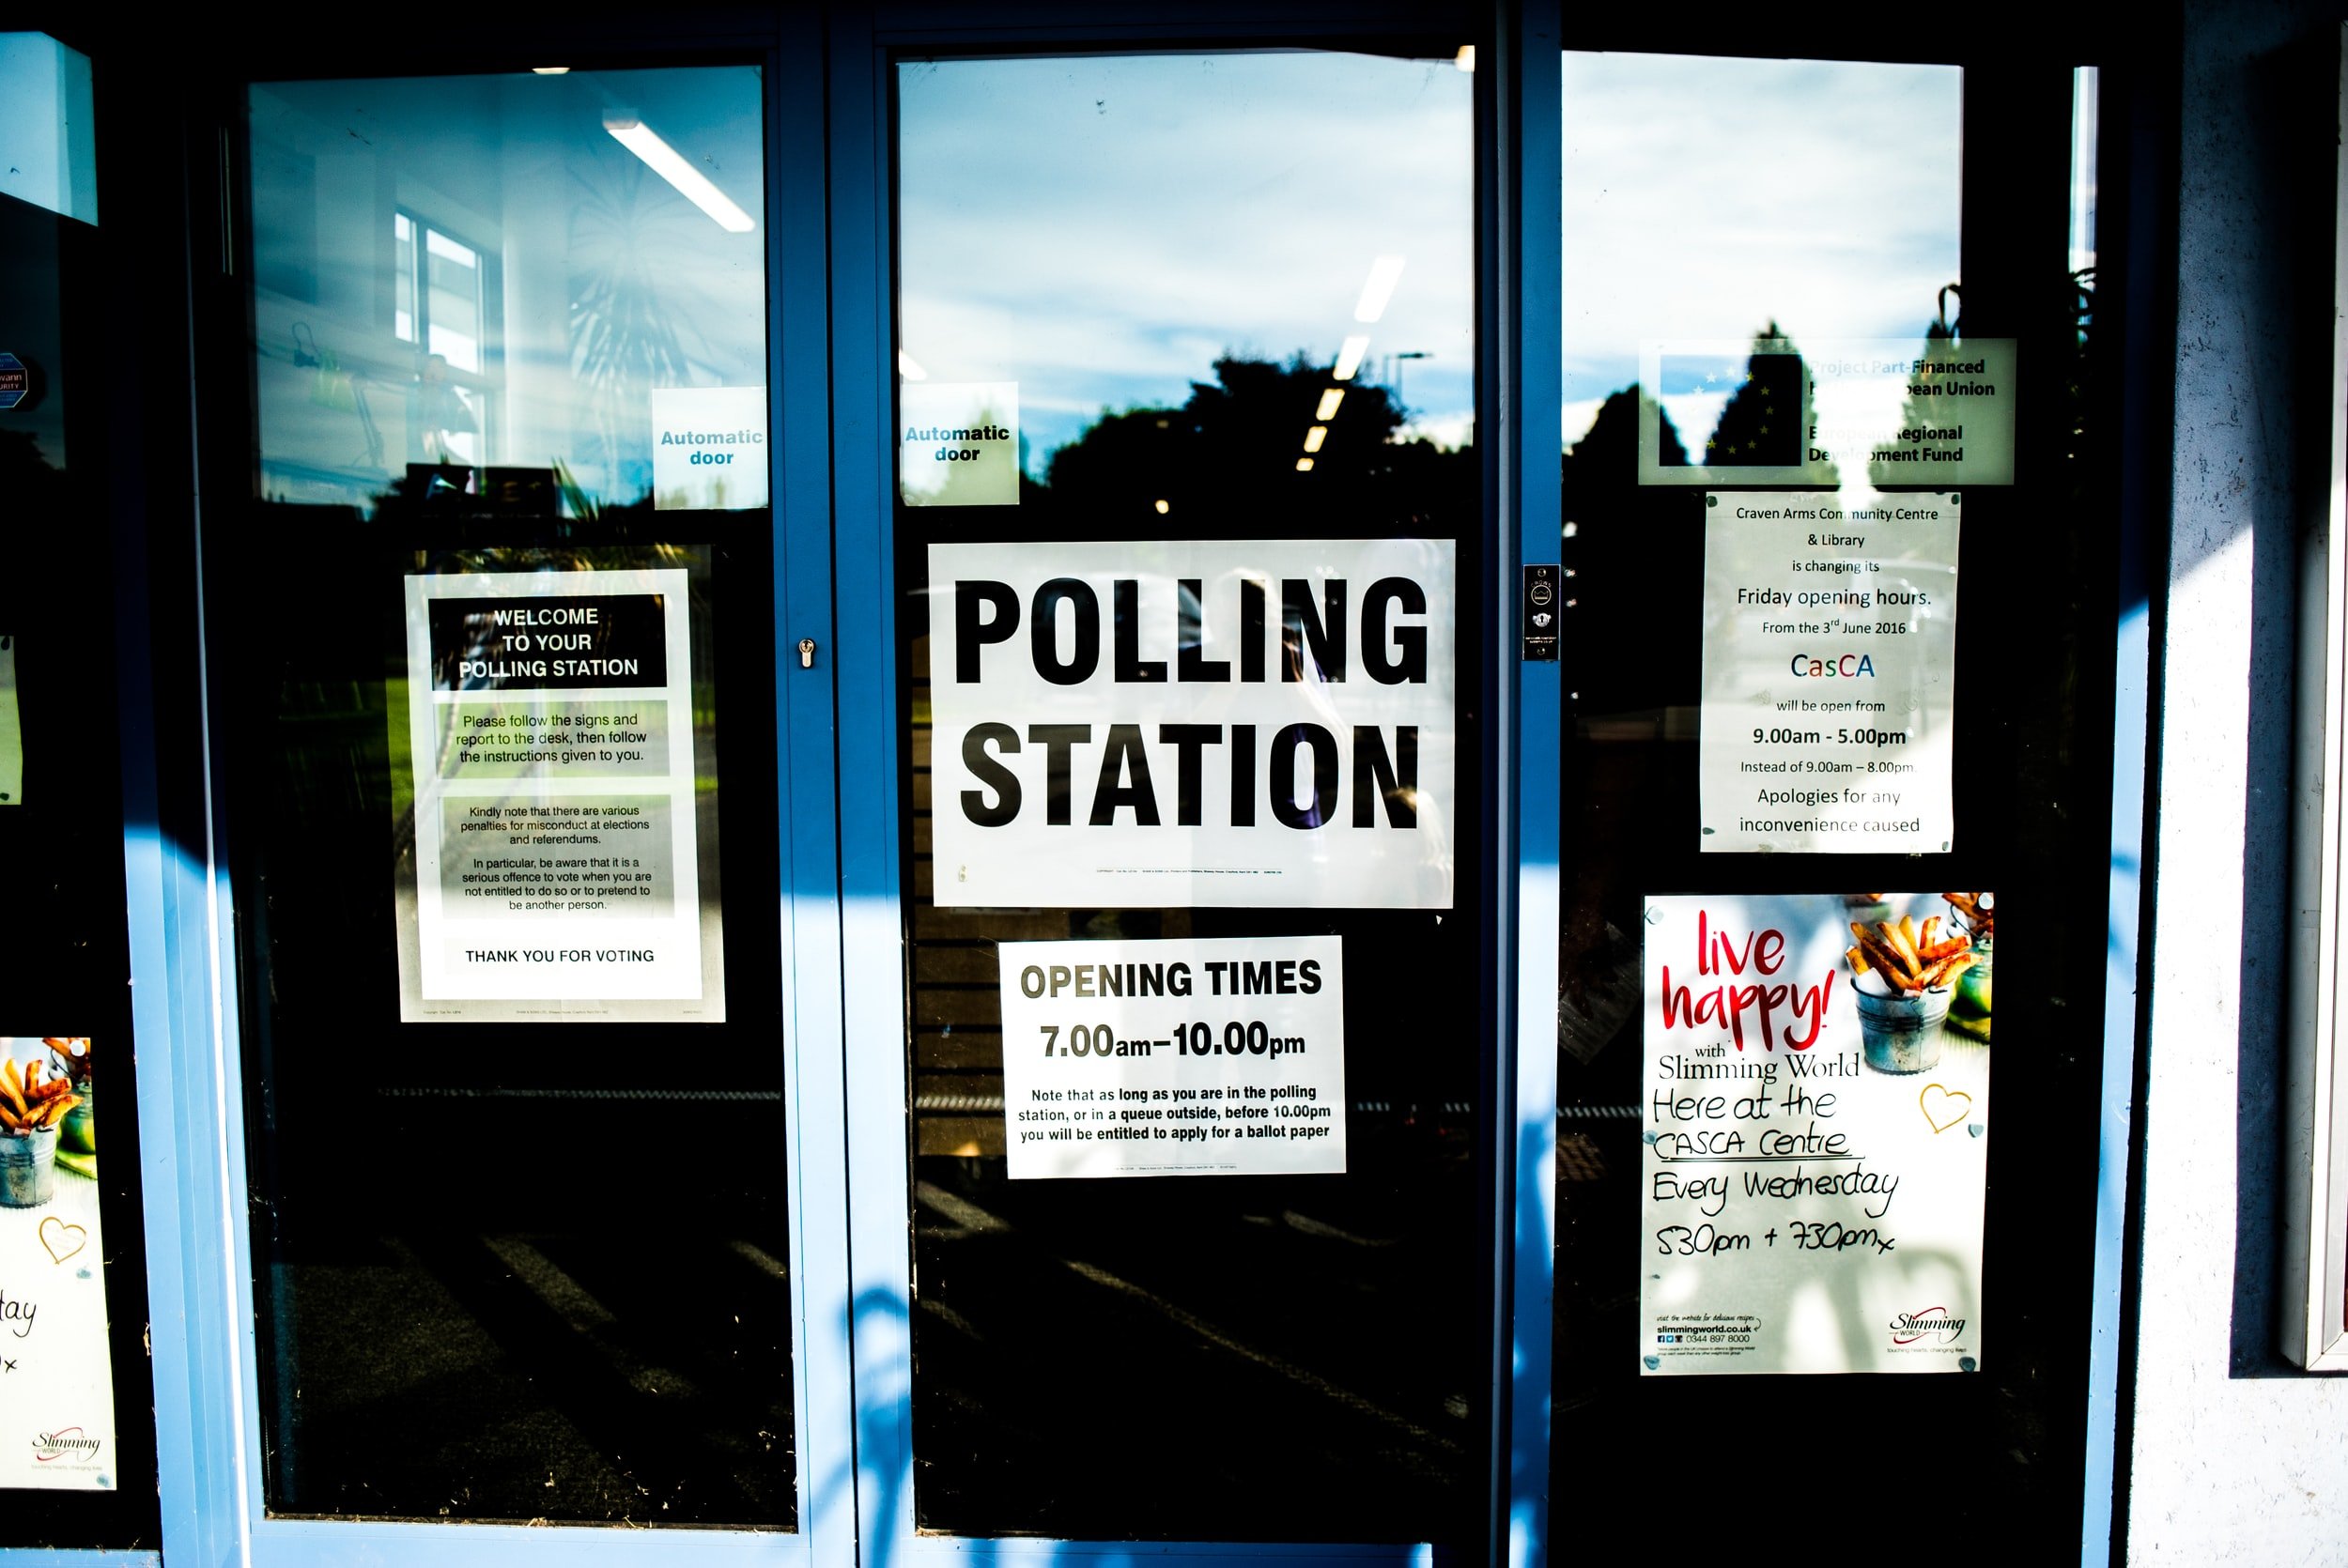 Essays: Would a change to the Westminster electoral system improve the state of UK democracy?